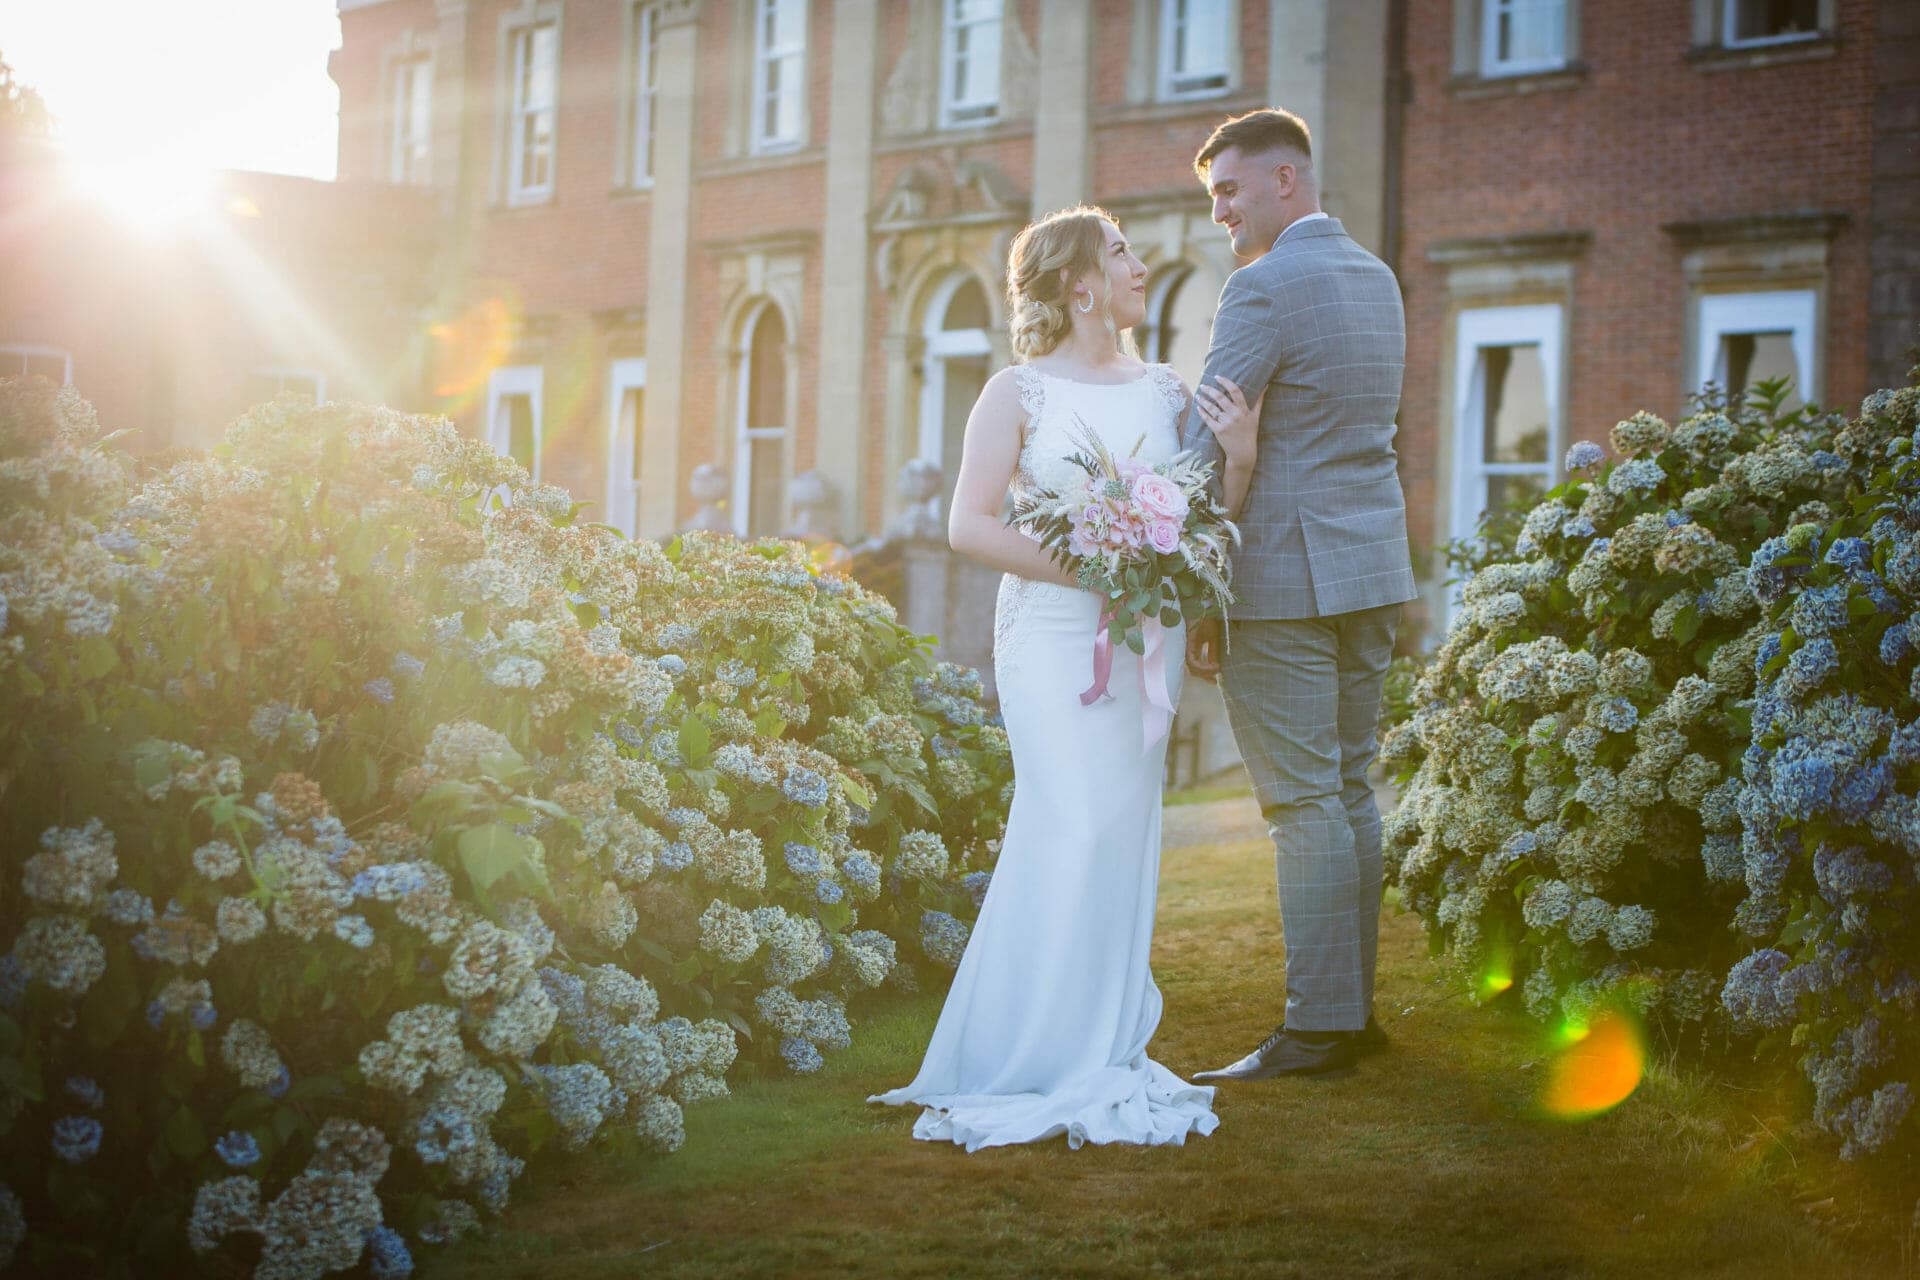 Clara and Ash’s Wedding at Crowcombe Court